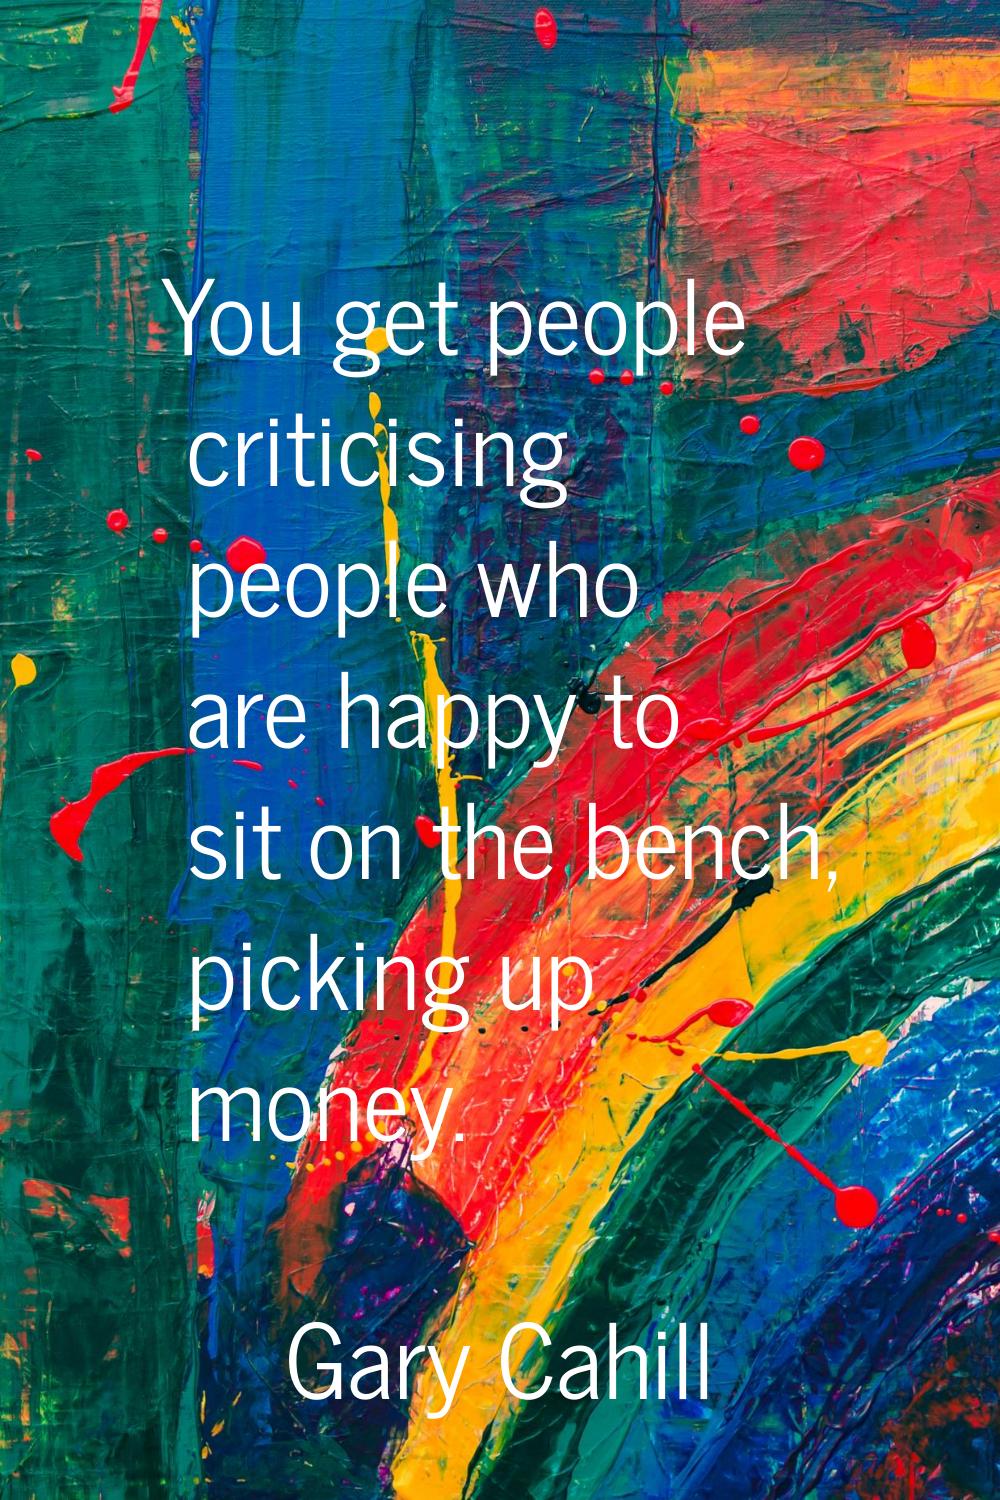 You get people criticising people who are happy to sit on the bench, picking up money.